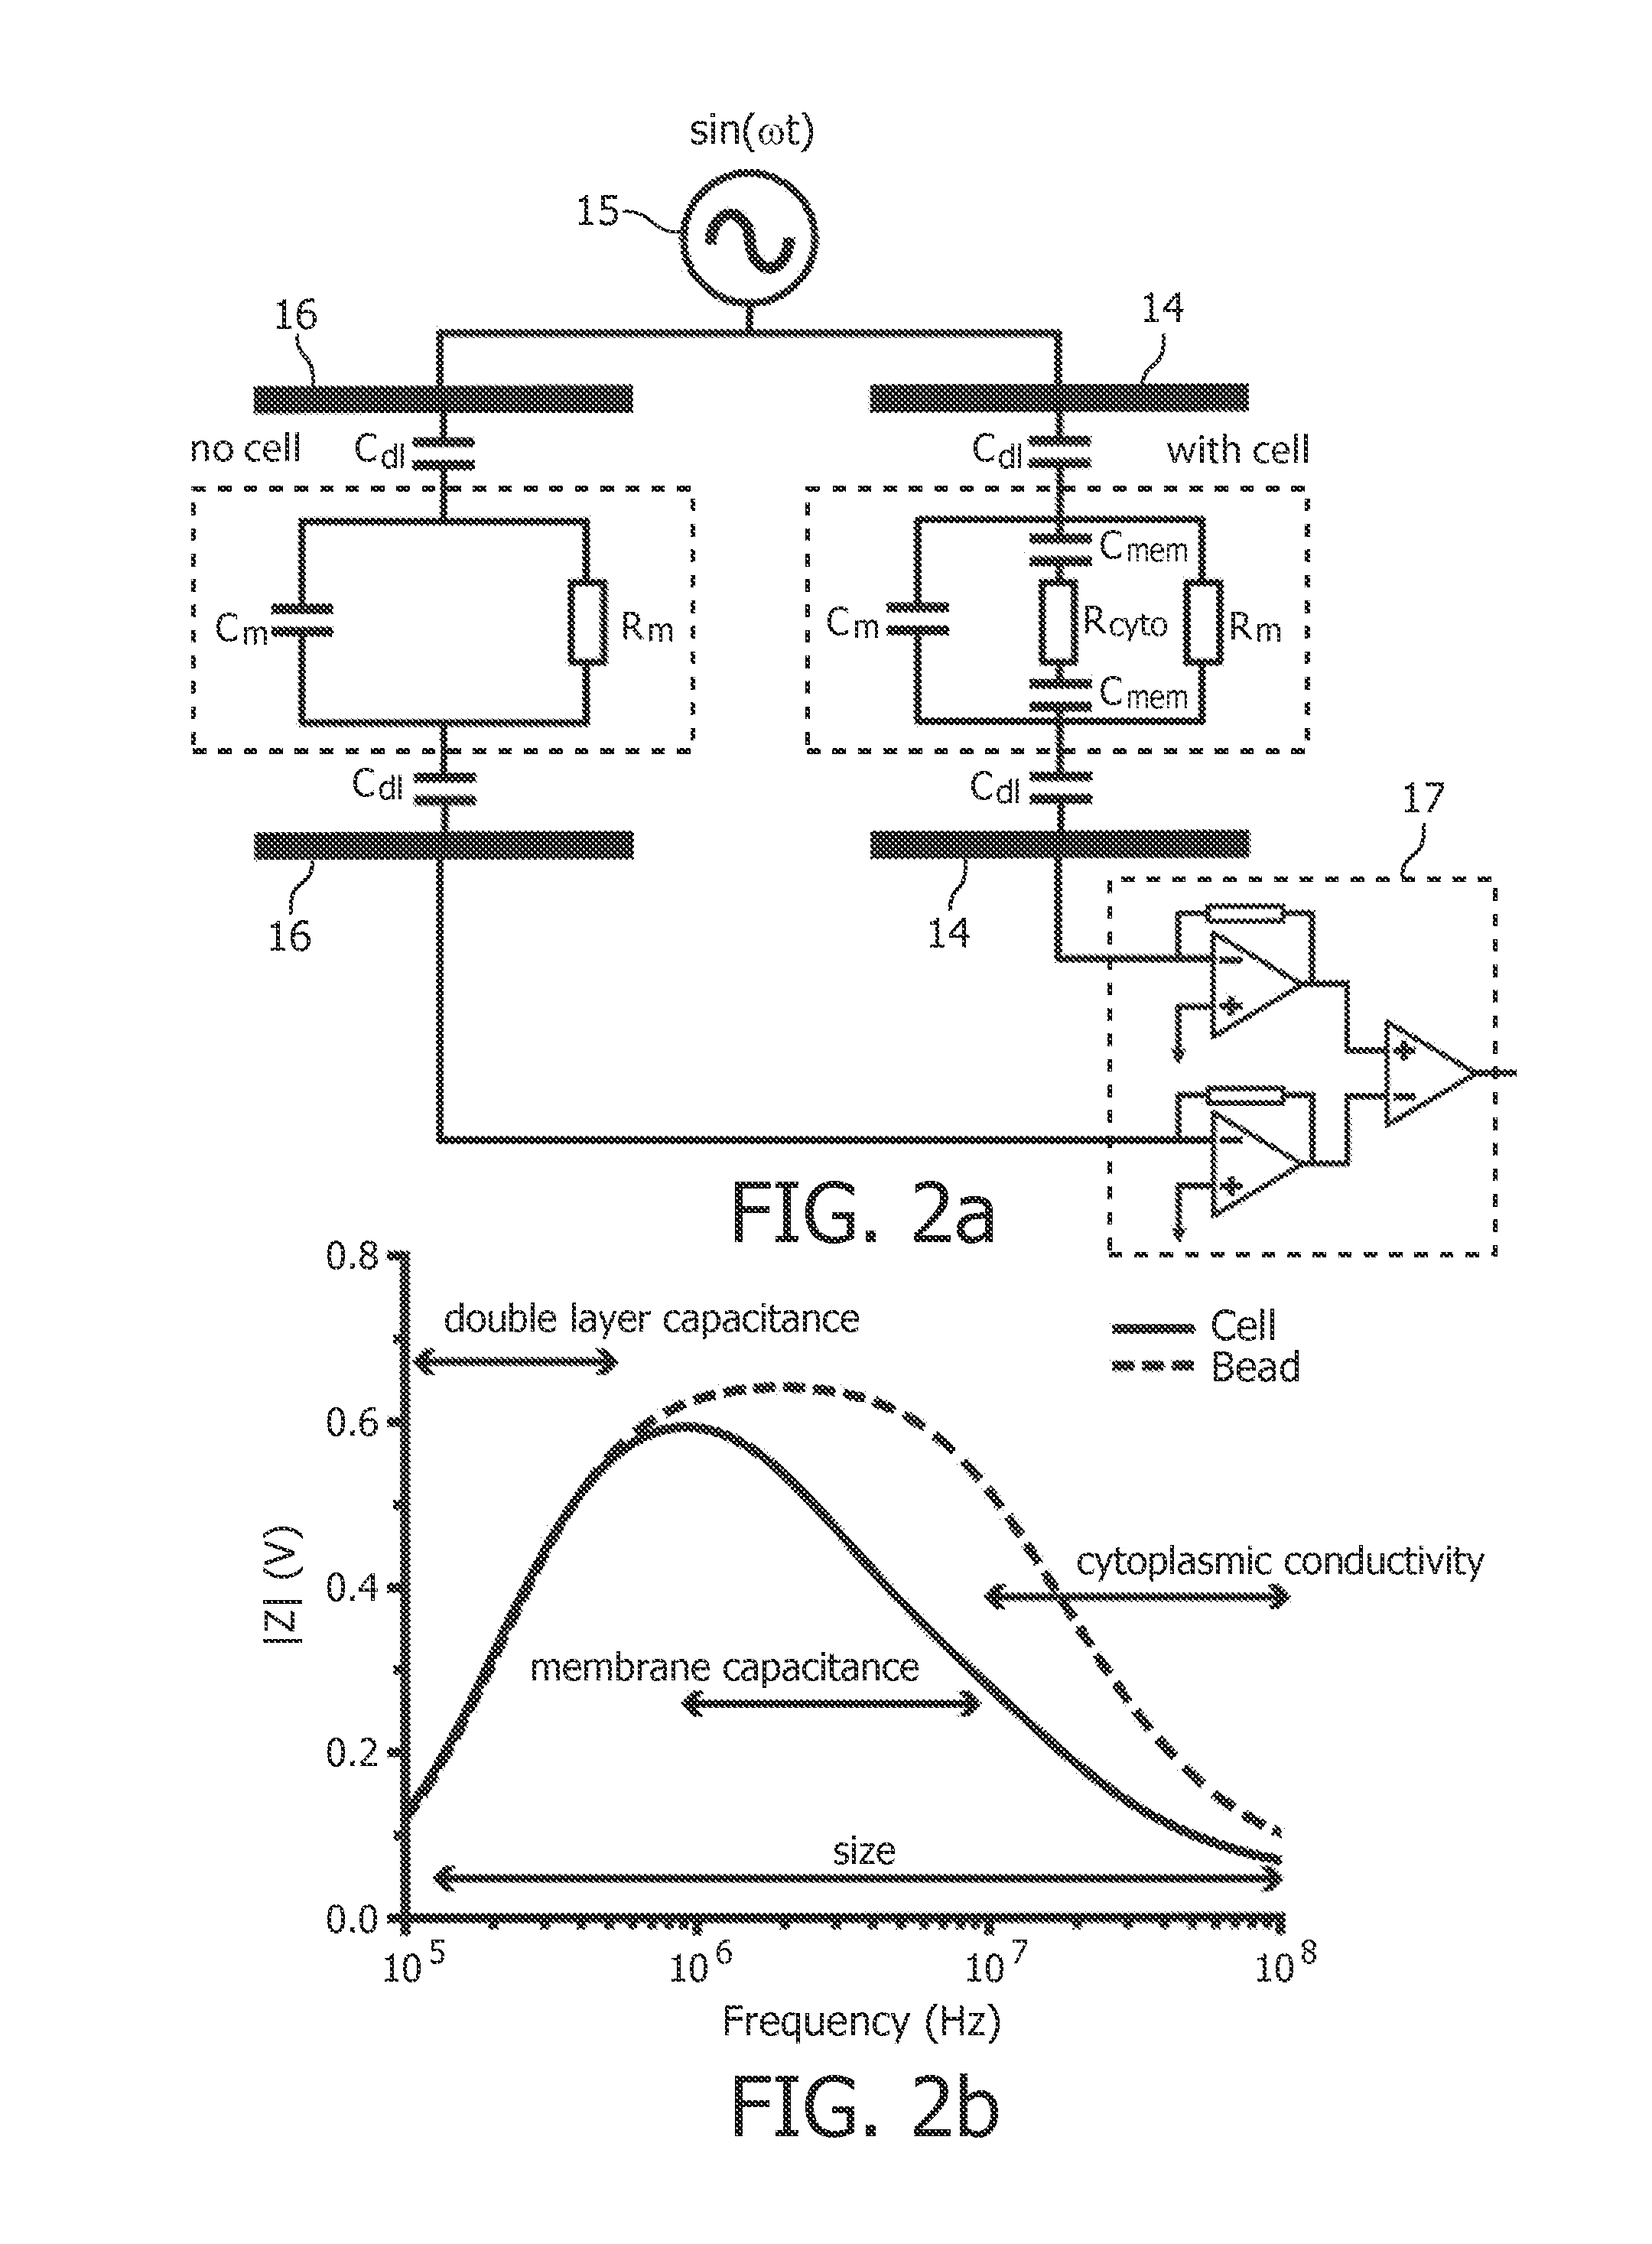 Multi-frequency impedance method and apparatus for discriminating and counting particles expressing a specific marker